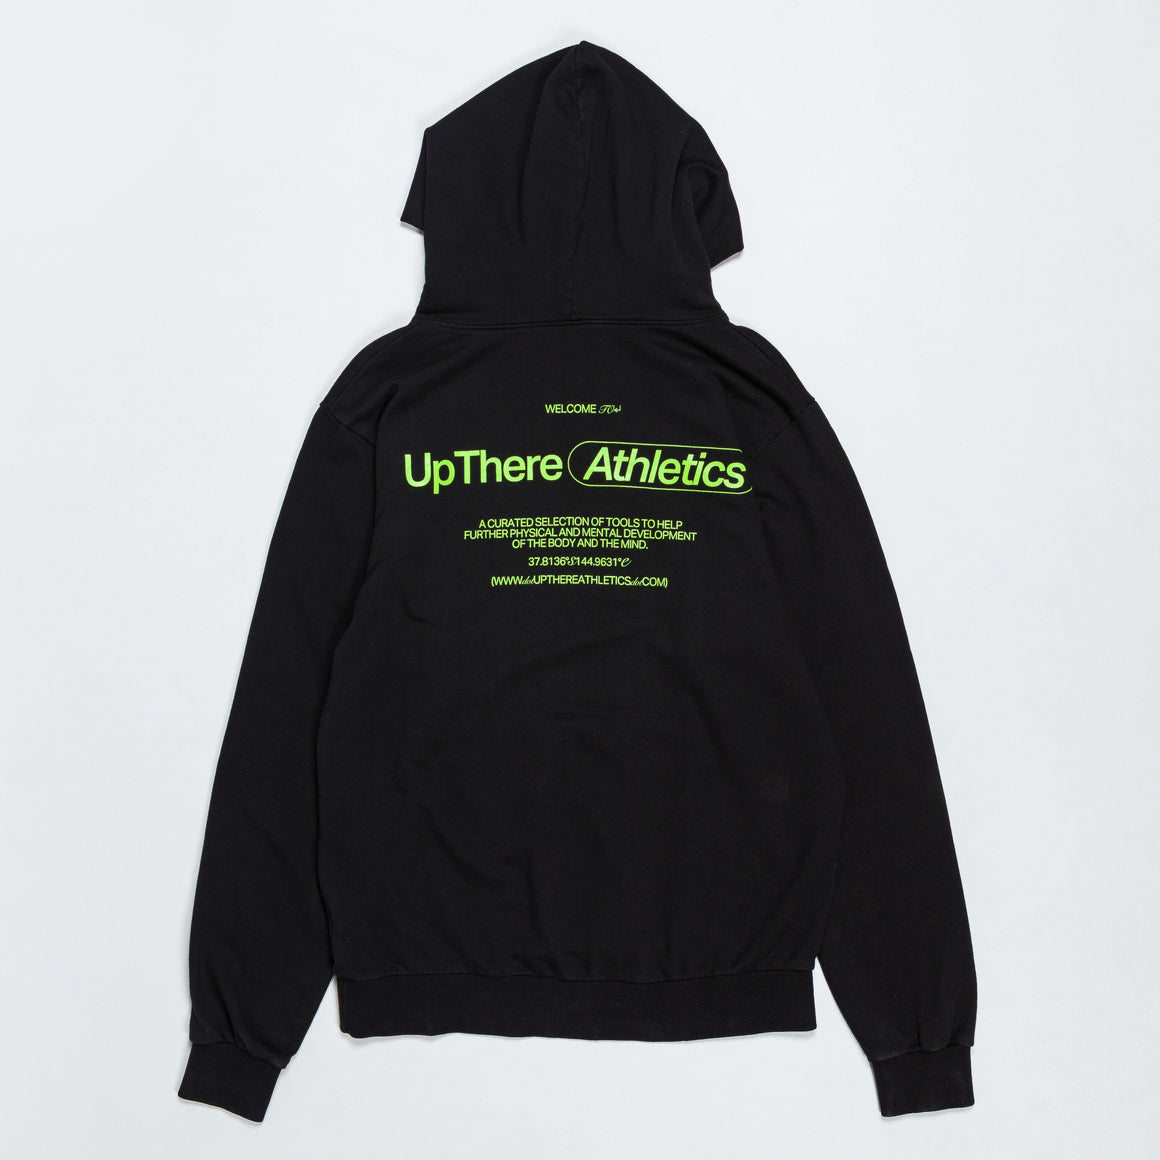 Up There Athletics - Welcome Hooded Sweat - Black - Up There Athletics